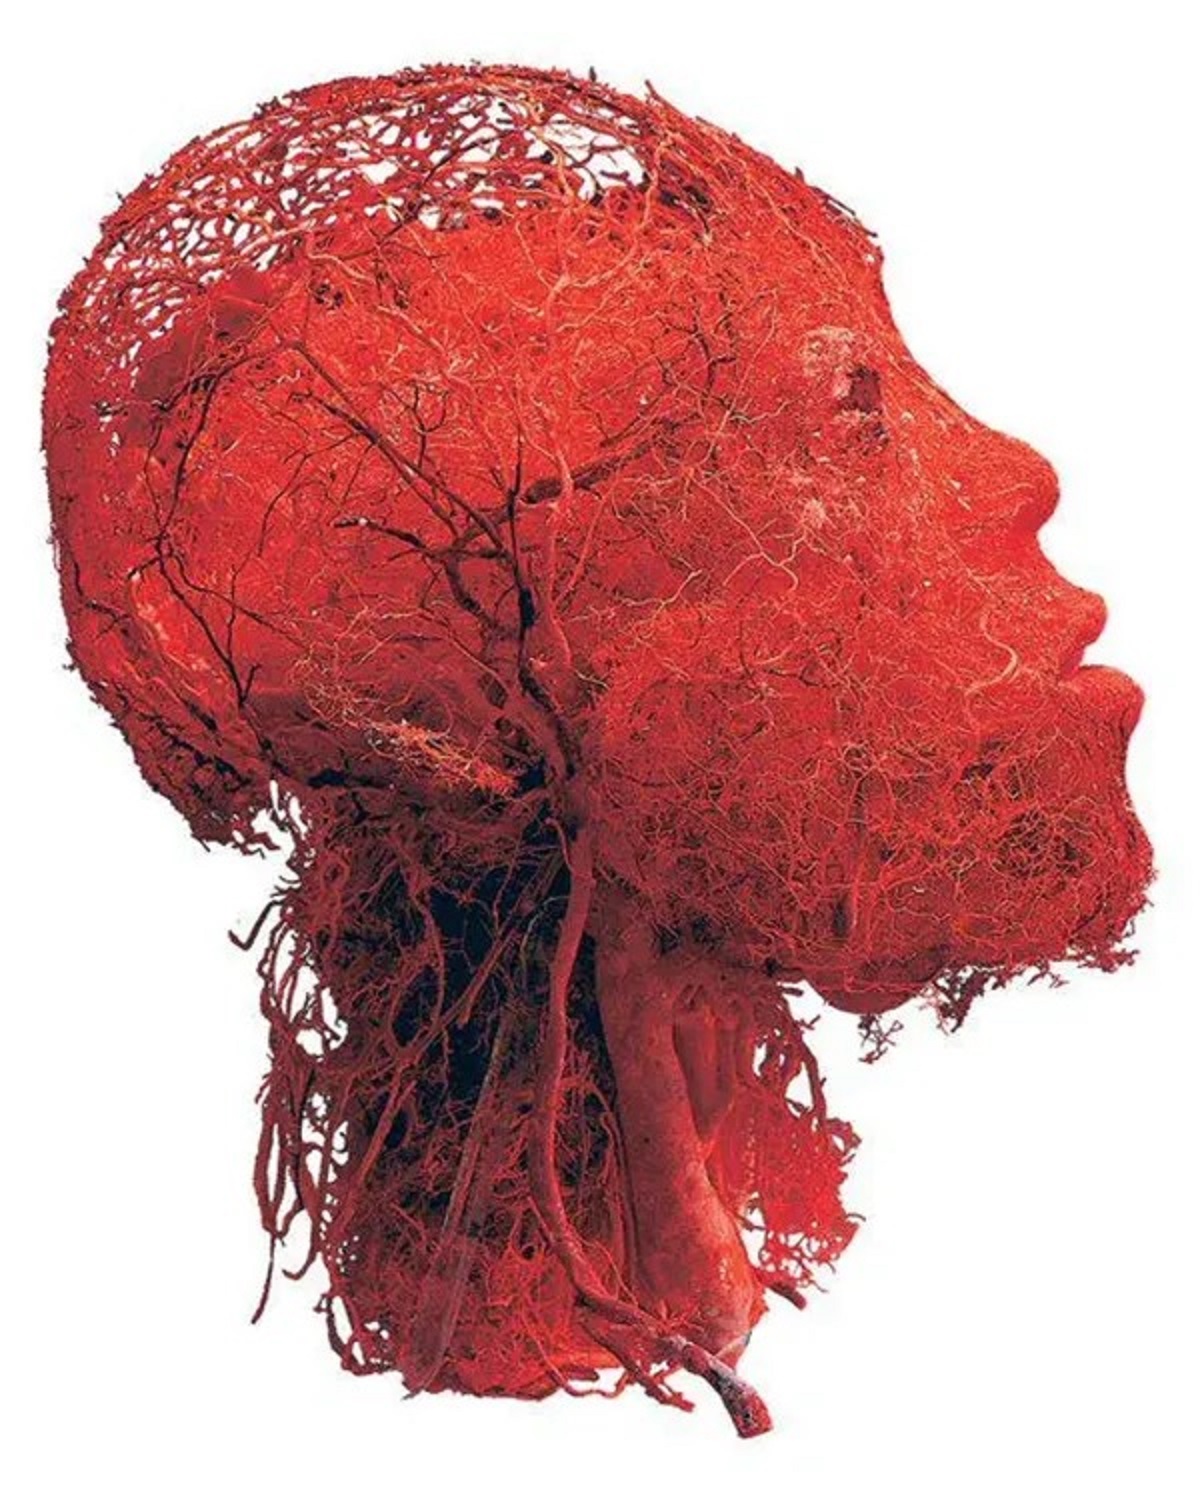 Visualization of blood vessels in brain and head.